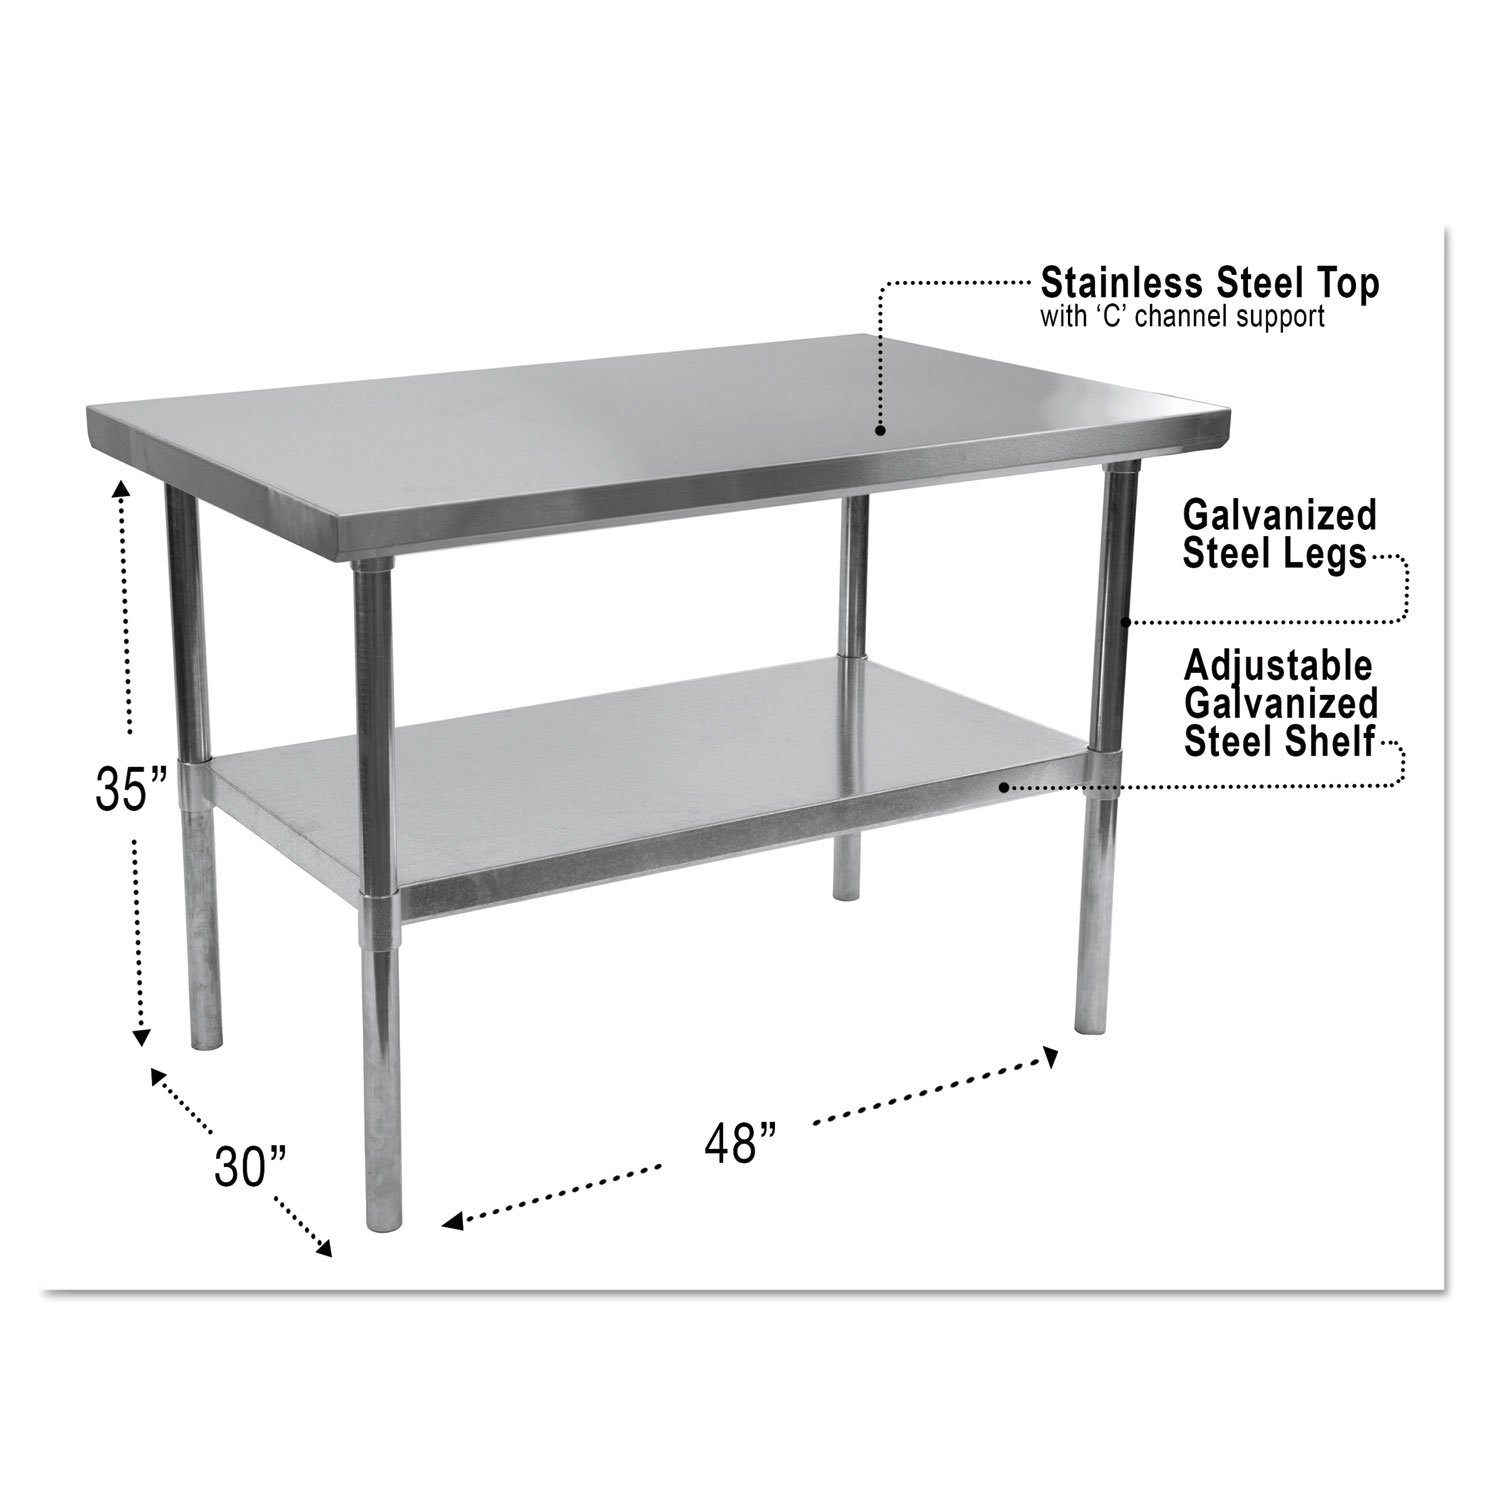  Alera ALEXS4830 NSF Approved Stainless Steel Foodservice Prep Table, 48 x 30 x 35h, Silver (ALEXS4830) 